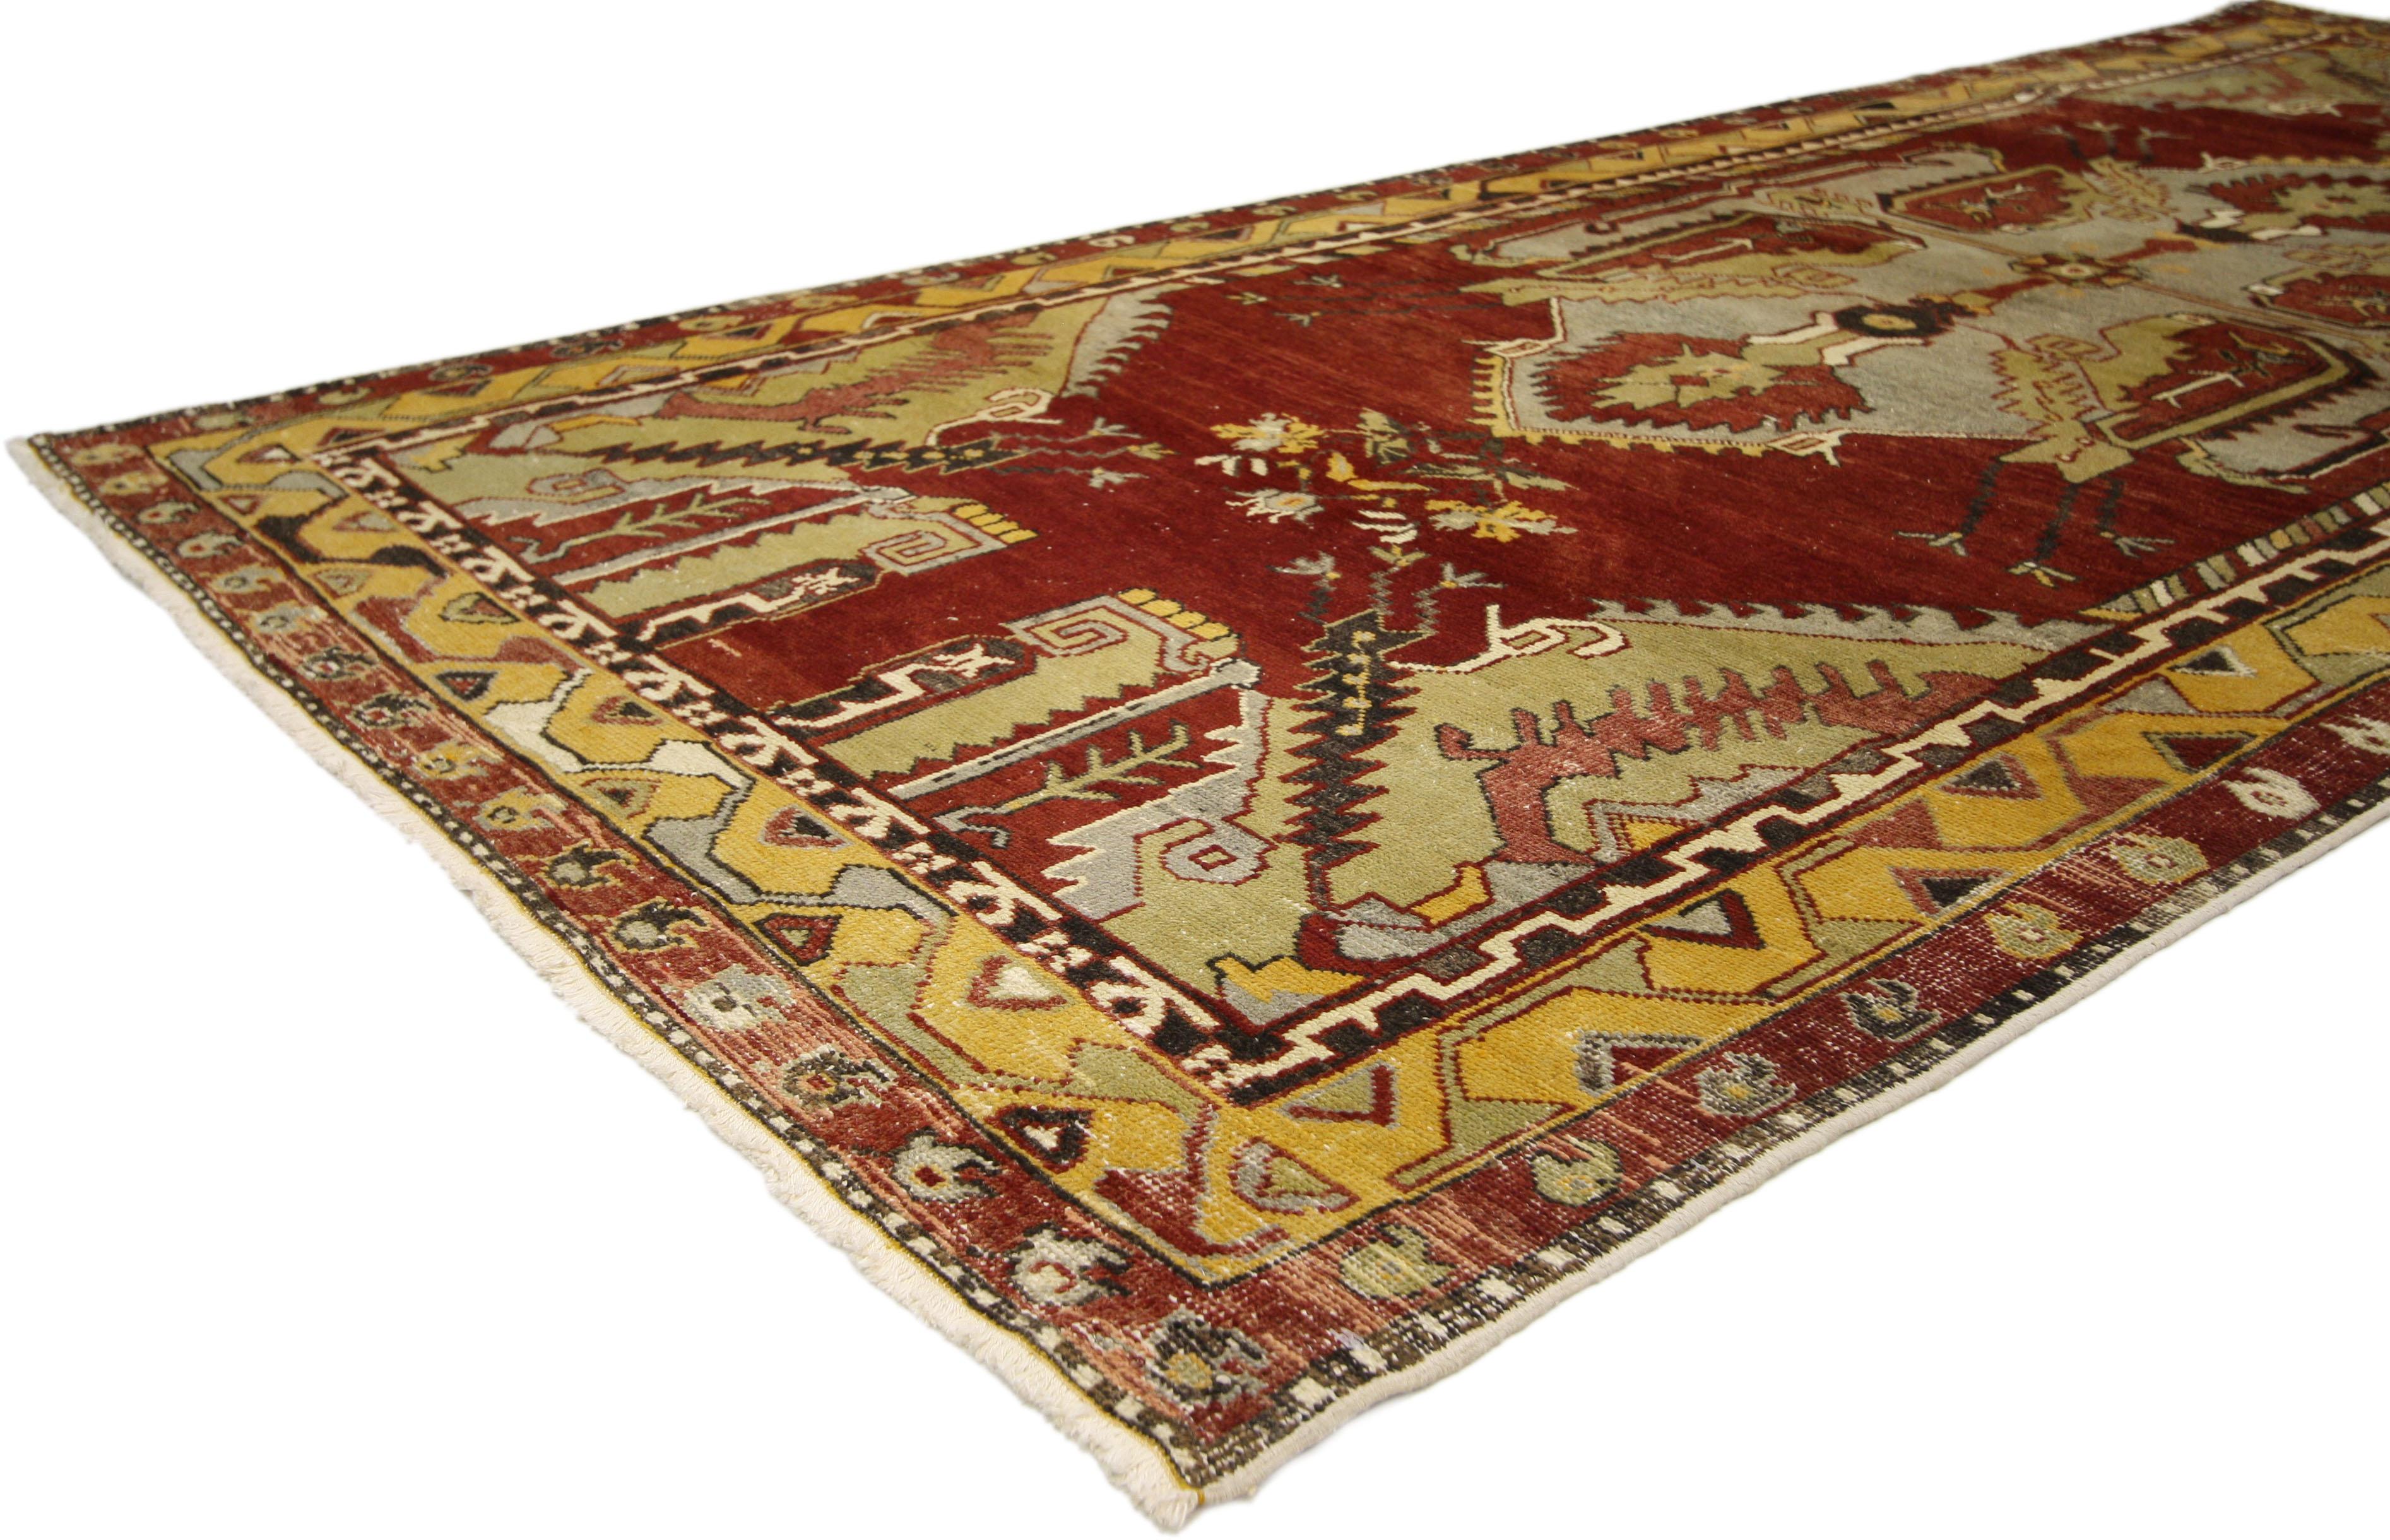 73637 Vintage Turkish Oushak Gallery Rug, Wide Hallway Runner with English Tudor Style 04'07 x 10'04. This vintage Turkish Oushak carpet runner handsomely communicates some of the finer and more important points of traditional Turkish design